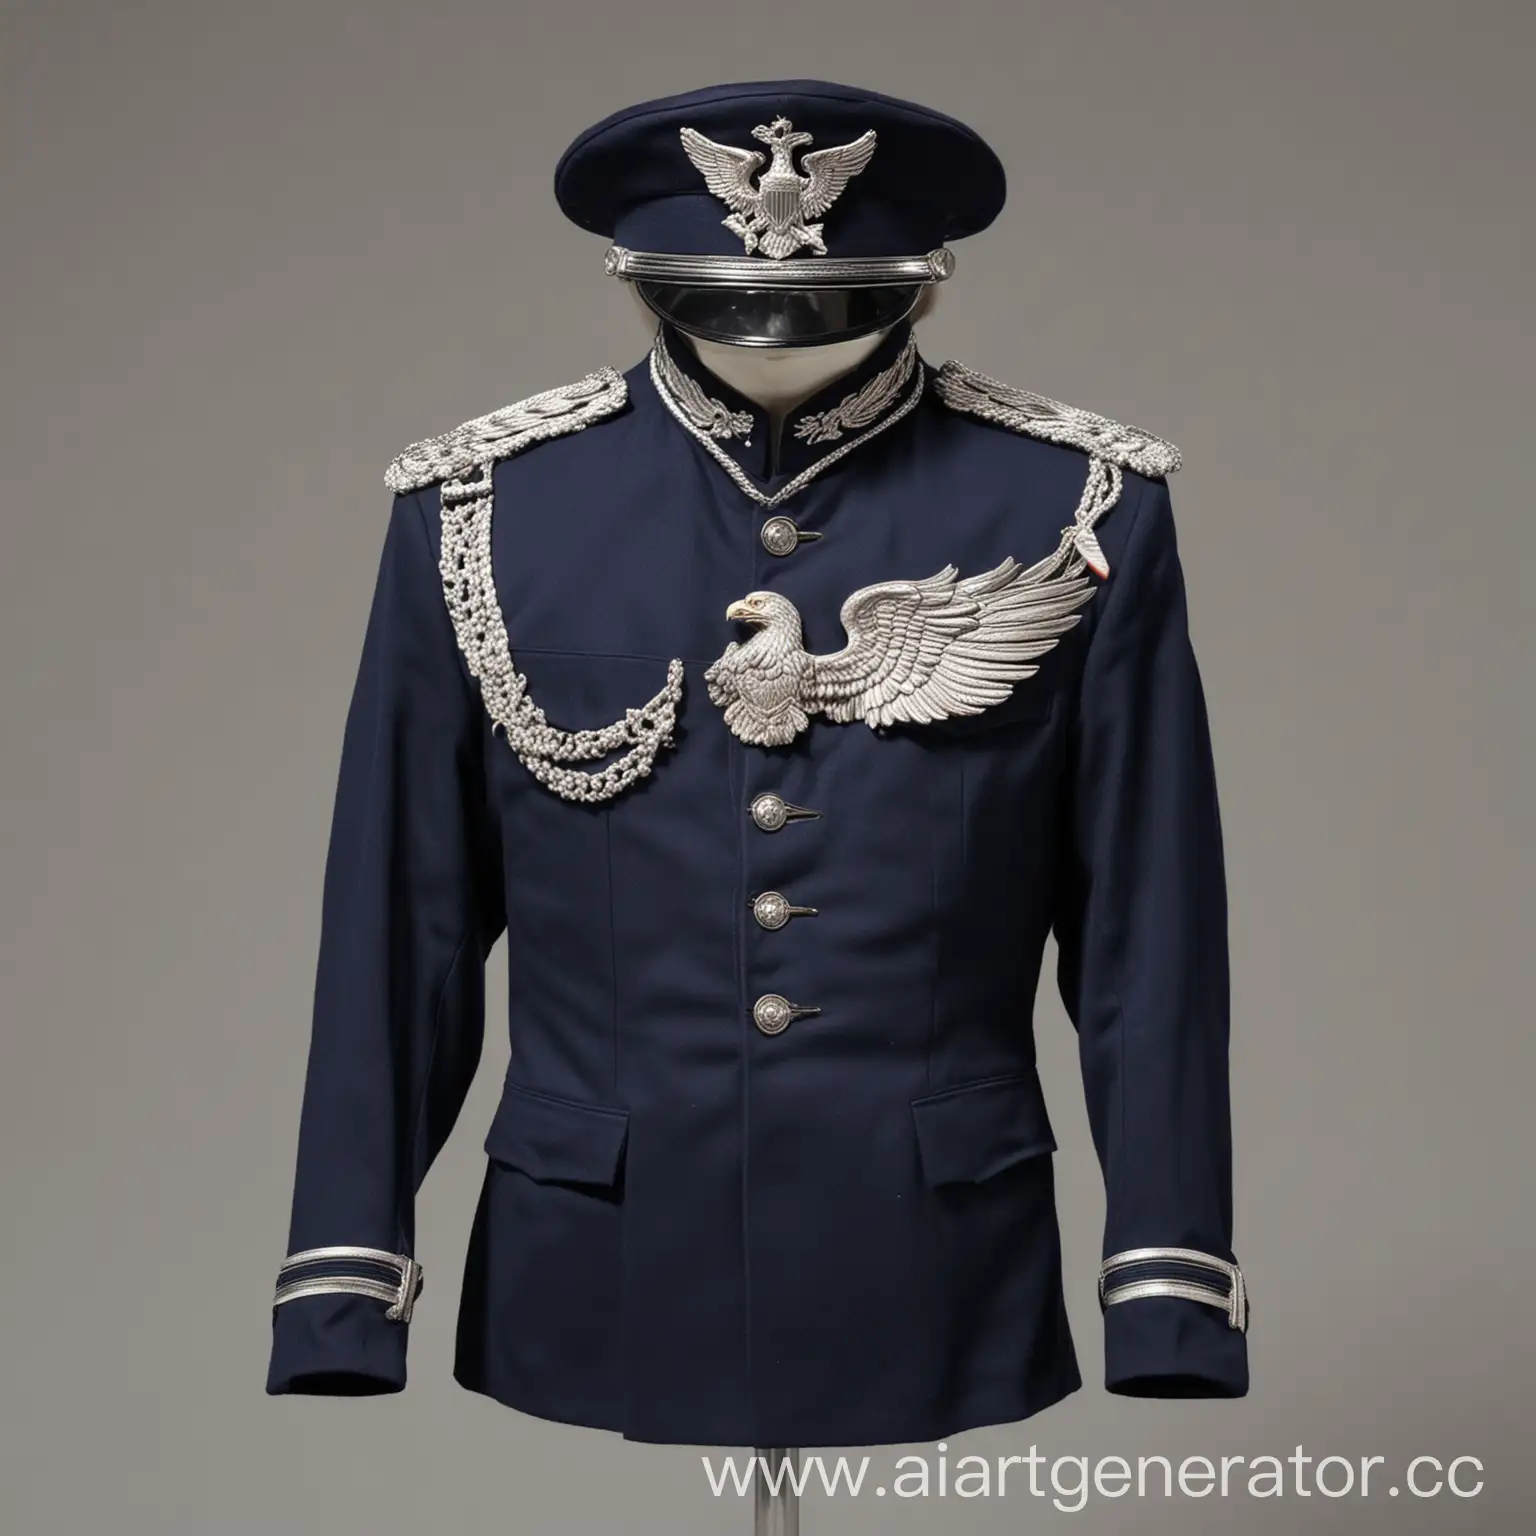 Elegant-Navy-Parade-Uniform-with-Silver-Accents